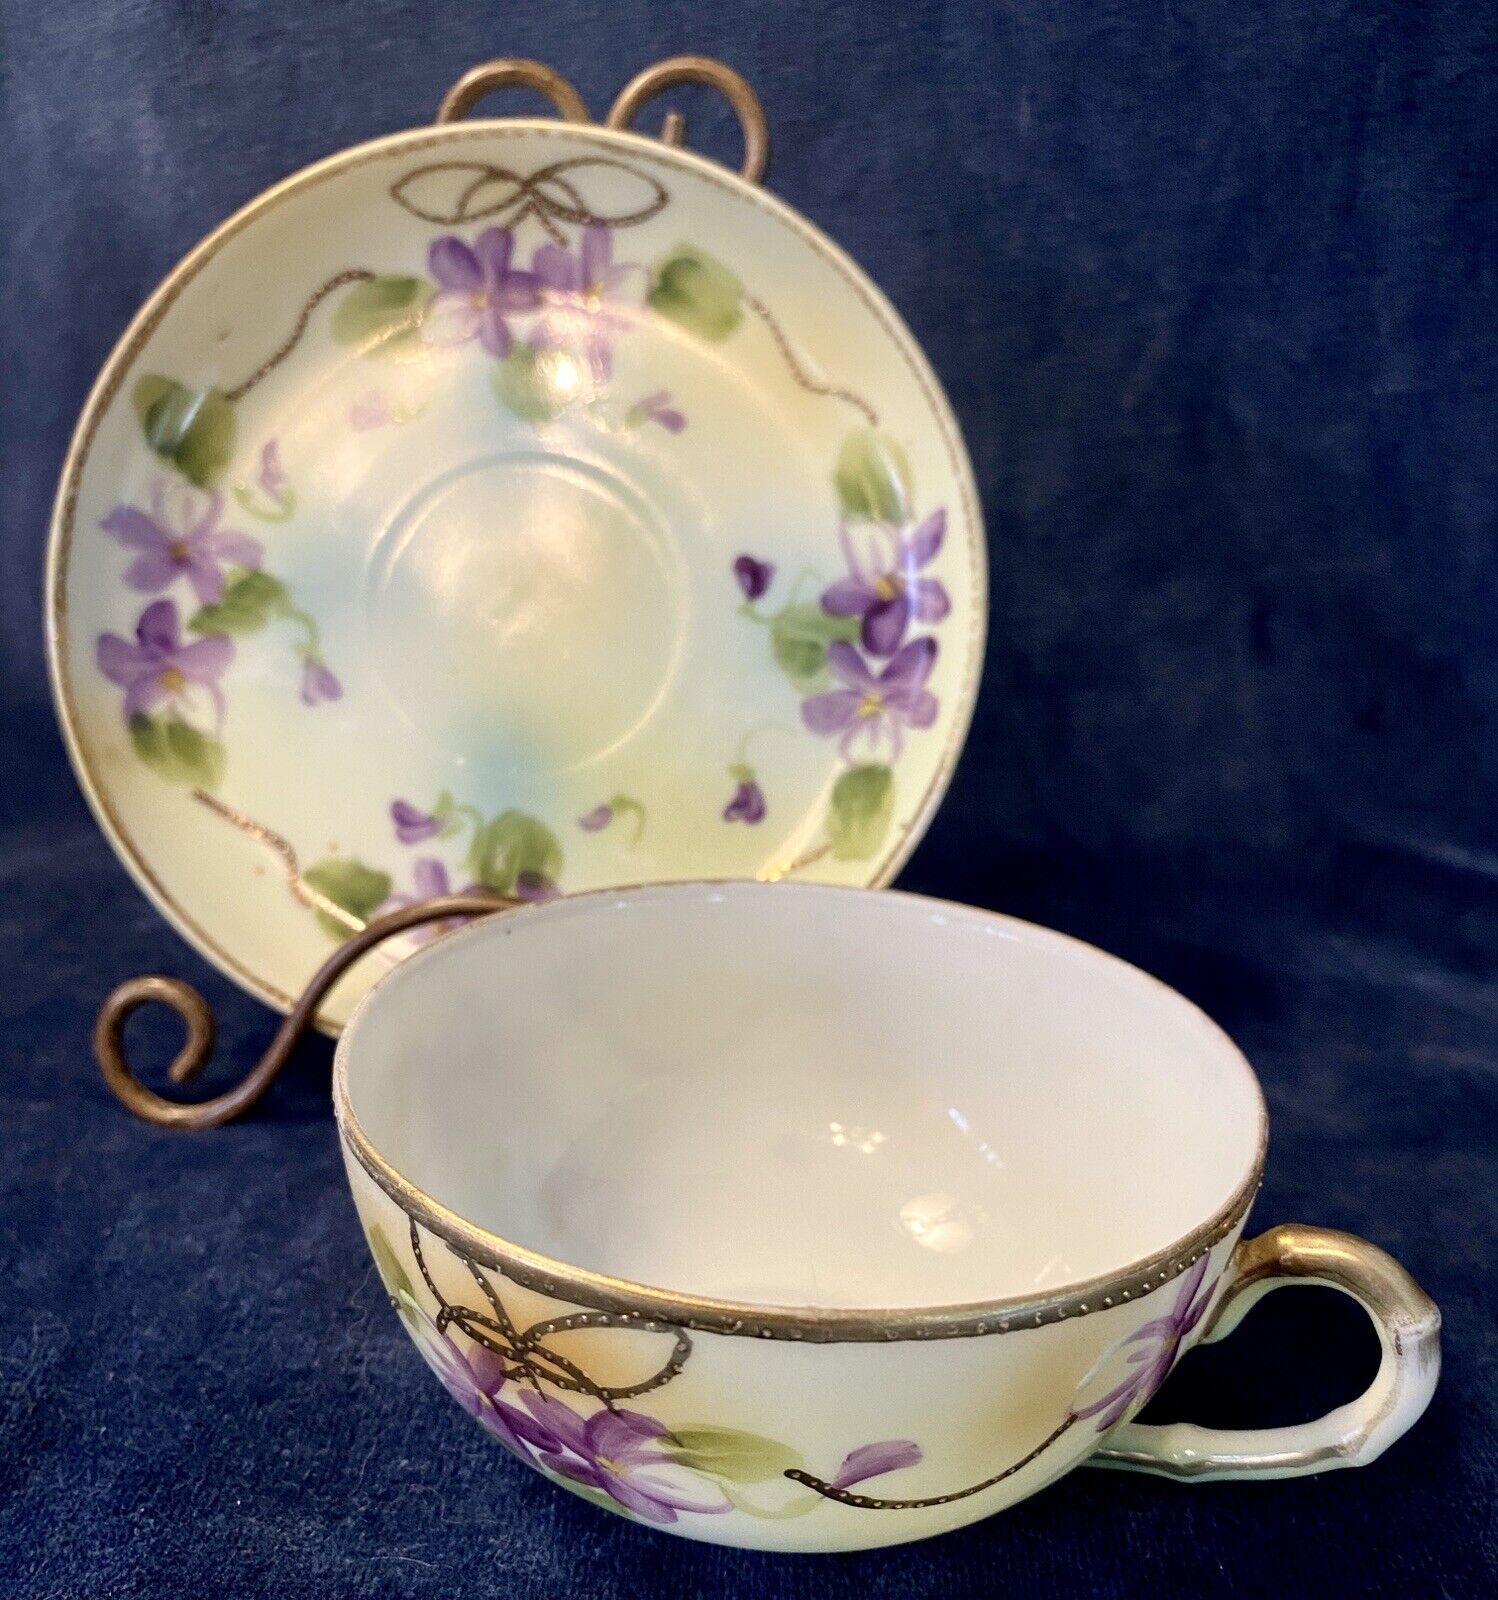 Nippon Hand Painted Teacup & Saucer Eggshell Bone China Floral Violets Antique